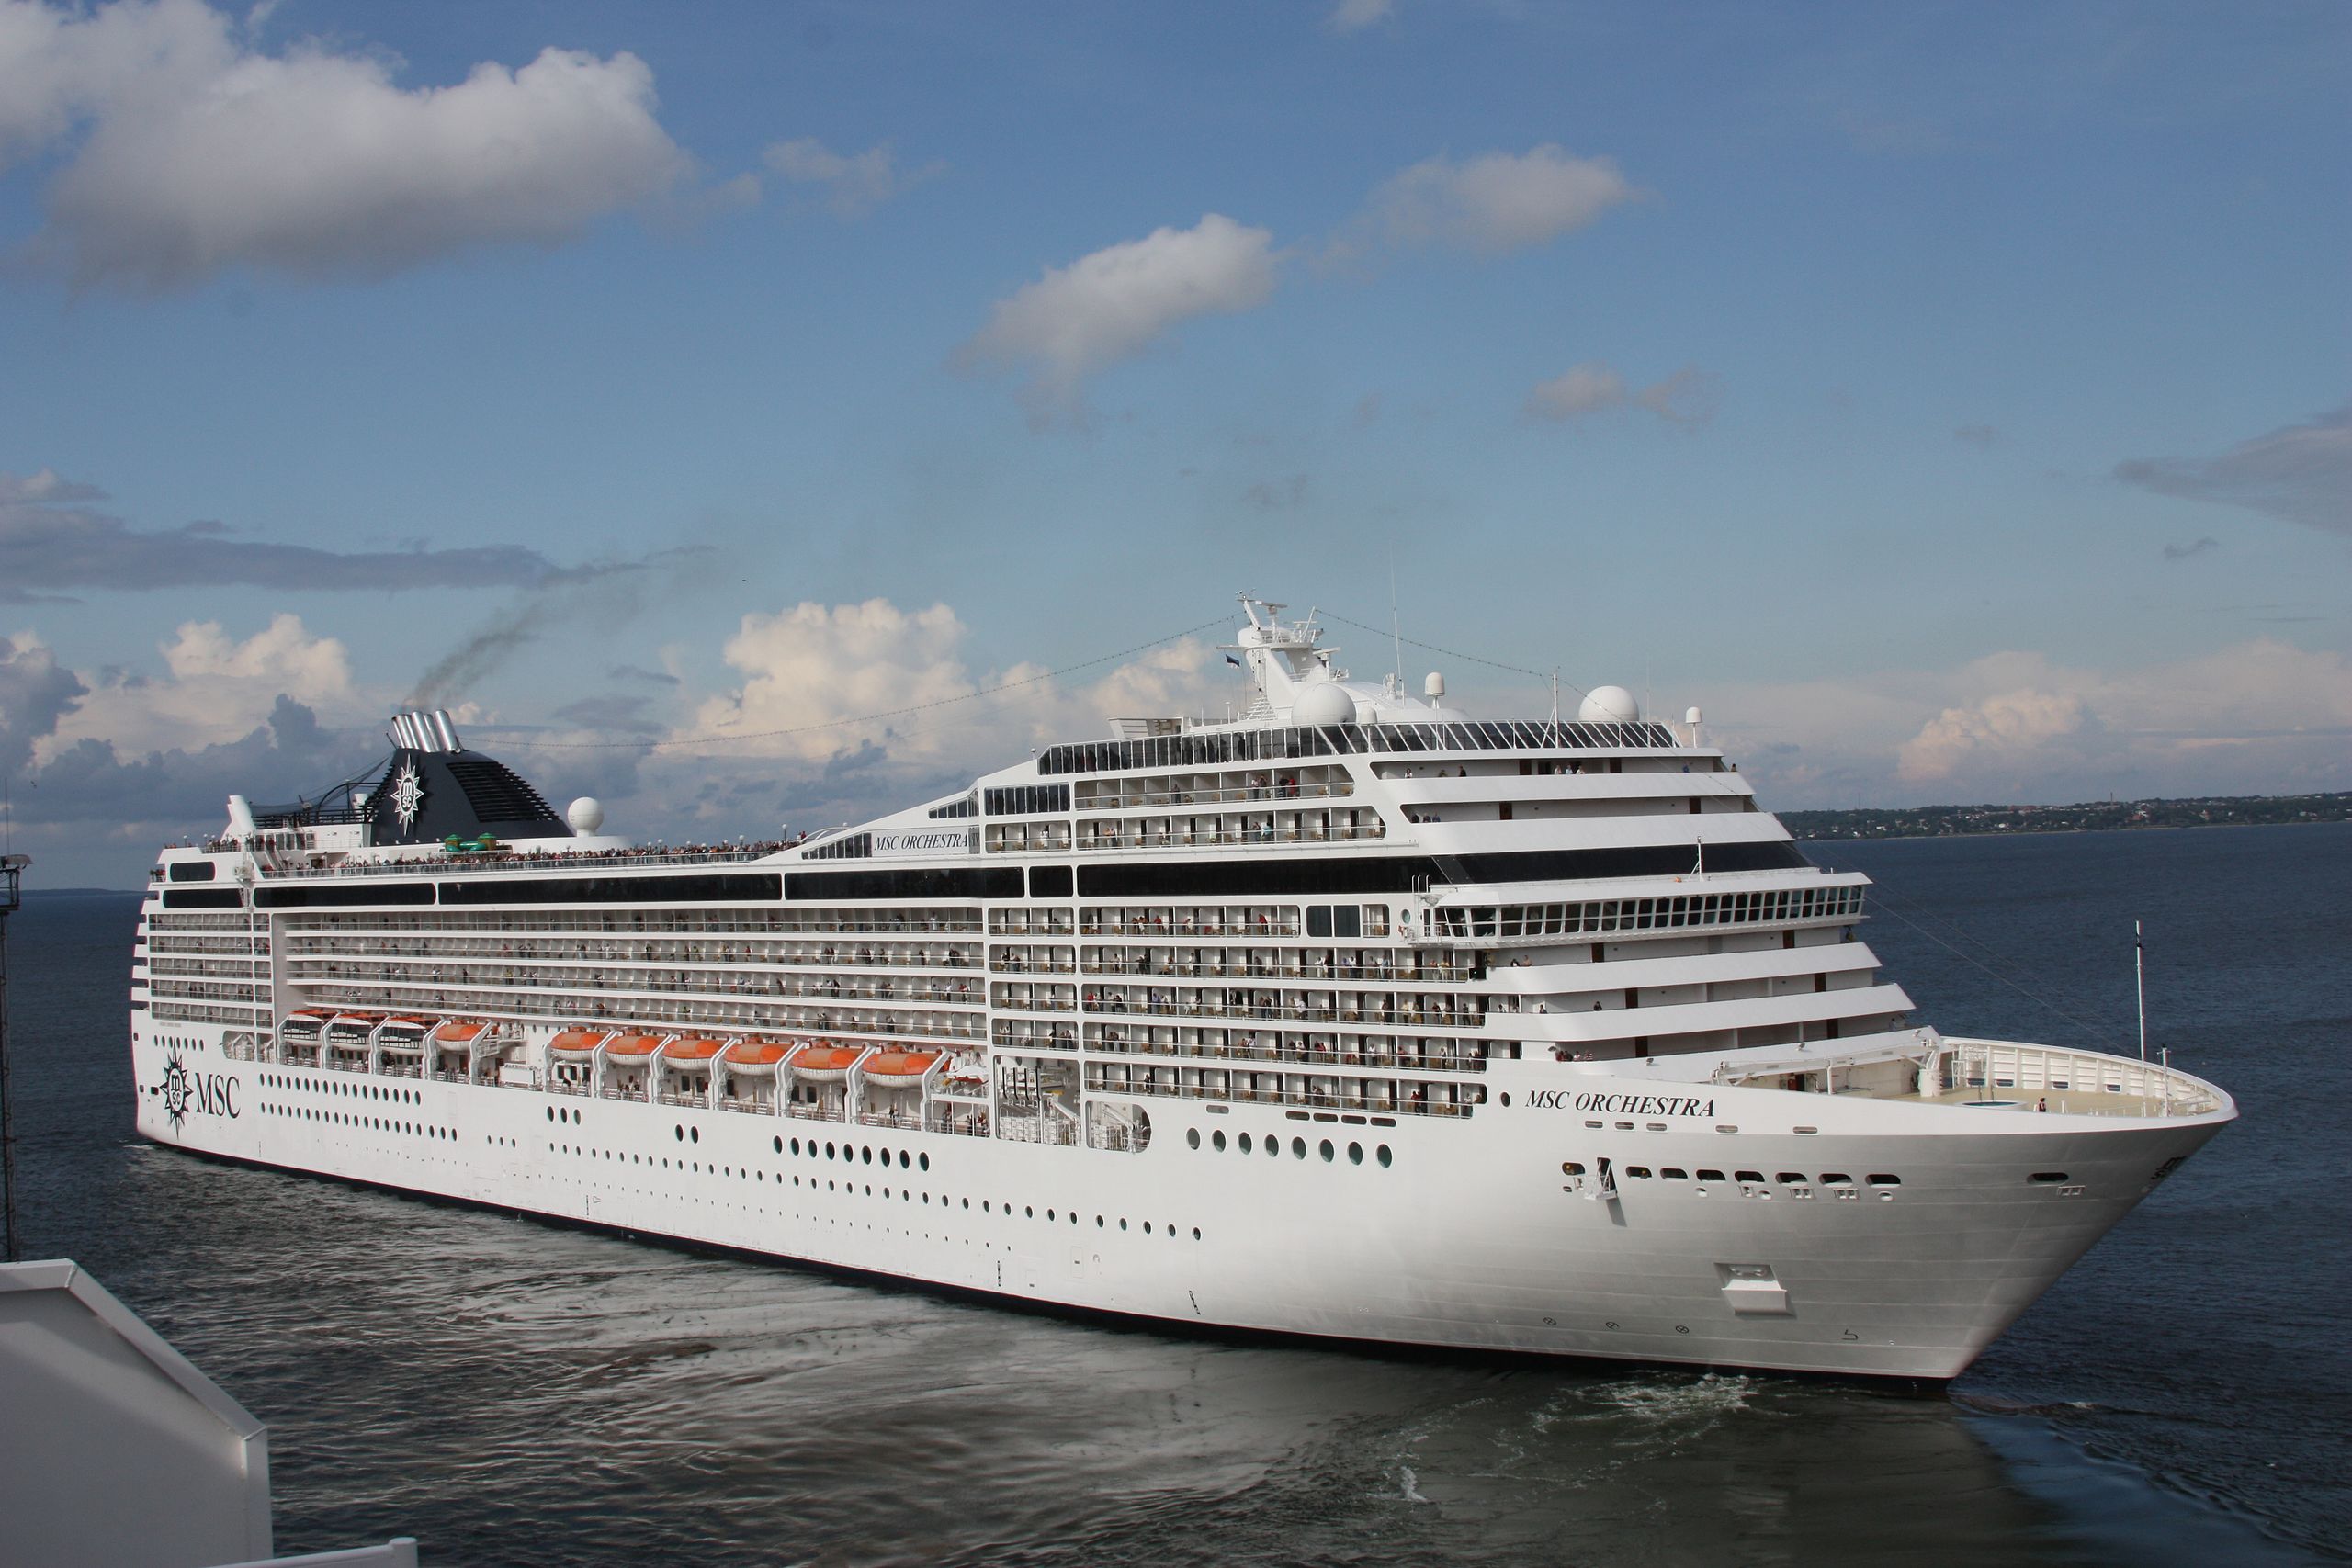 26 OCTOBER / ALICANTE CRUISE (11 Days) – MSC ORCHESTRA **CONTACT AT THE OFFICE**